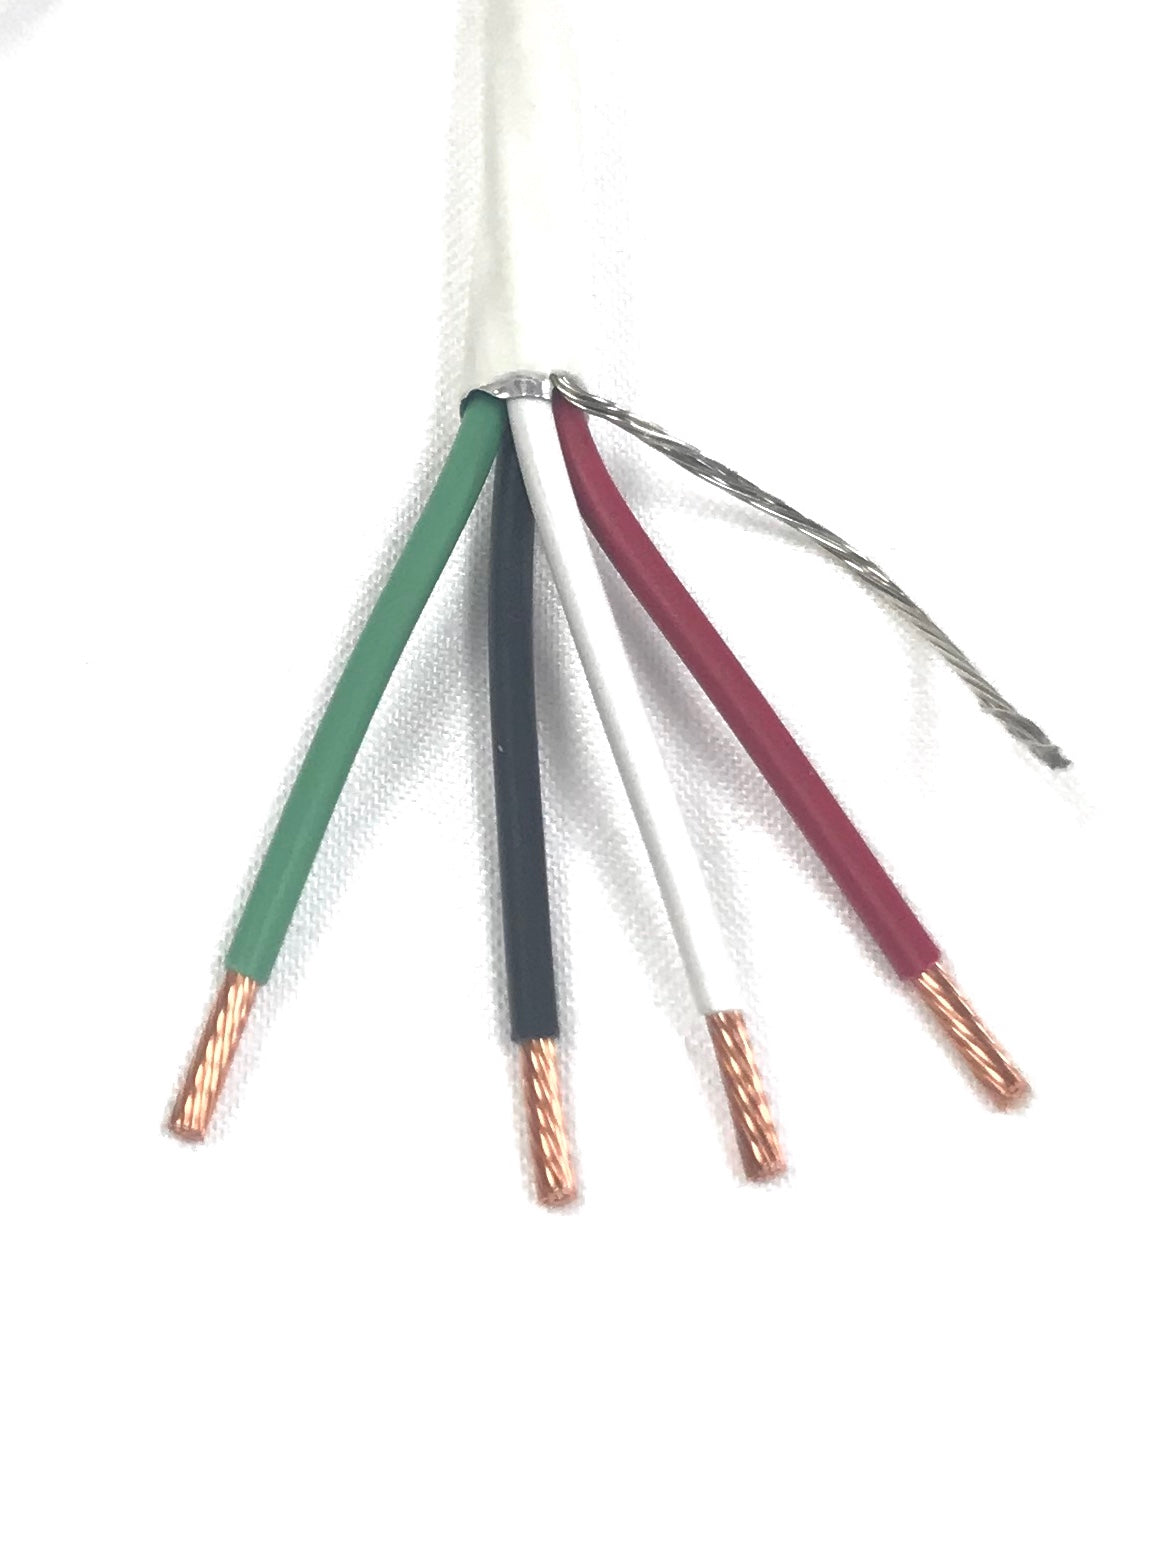 18 AWG 4 Conductor Stranded Shielded Plenum Cable